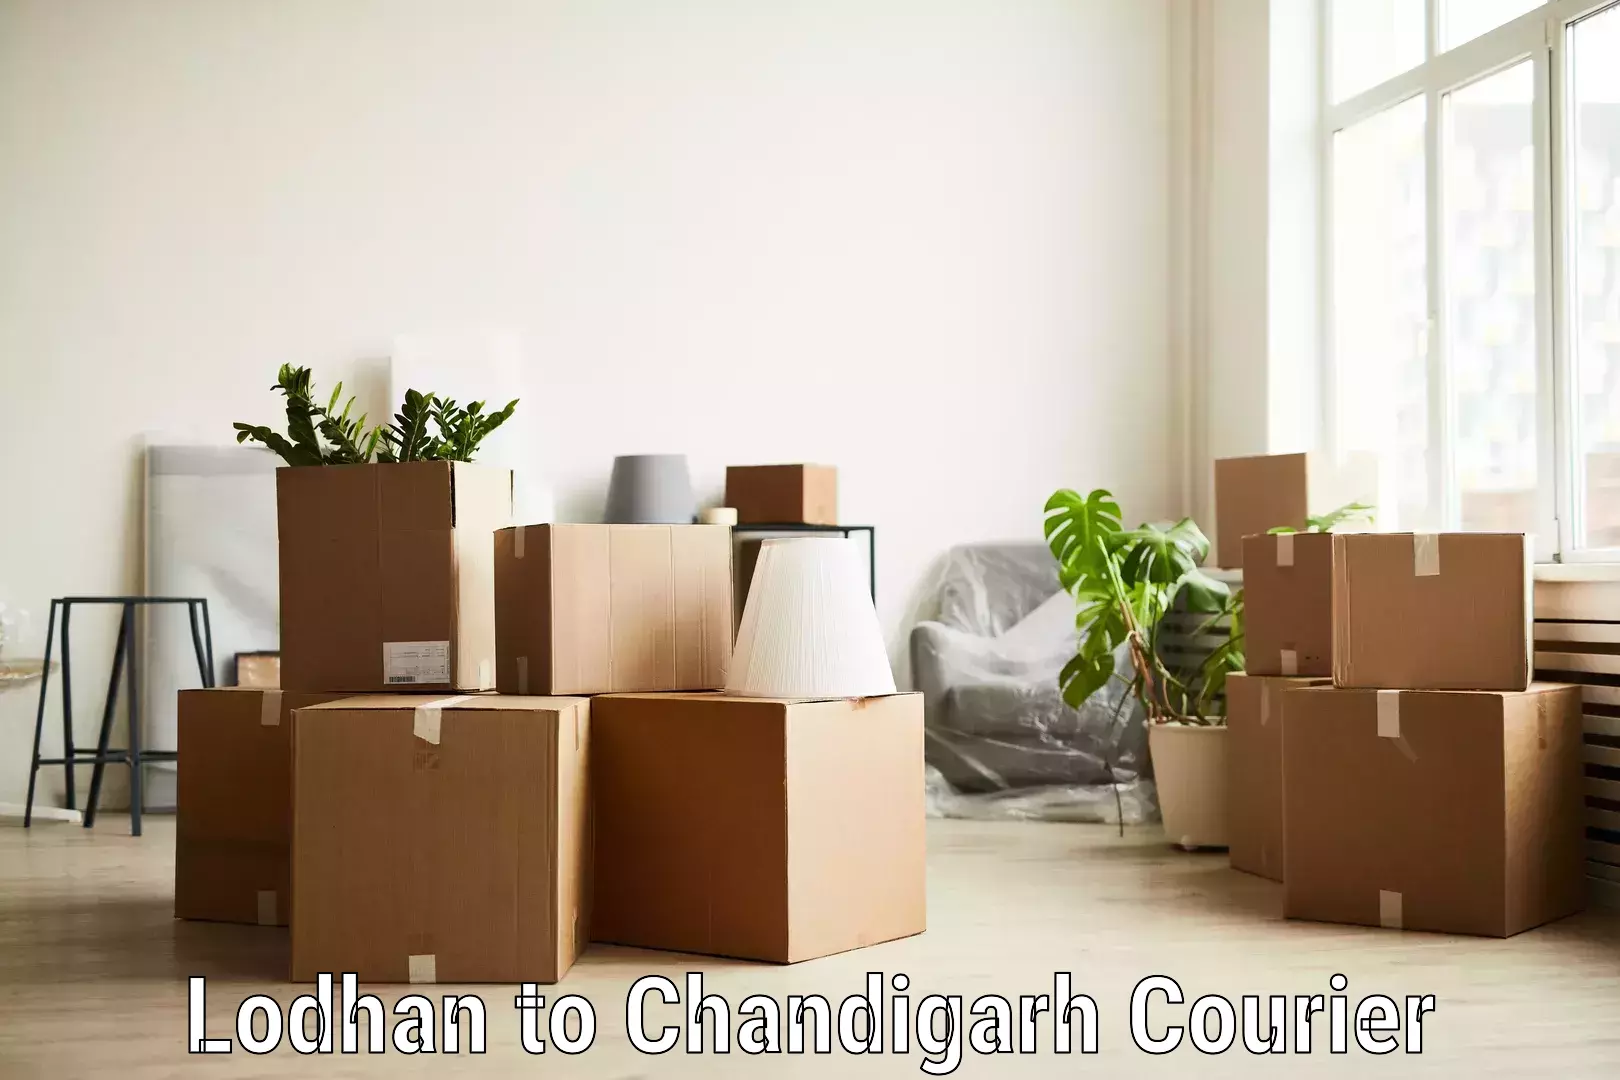 Advanced courier platforms Lodhan to Chandigarh